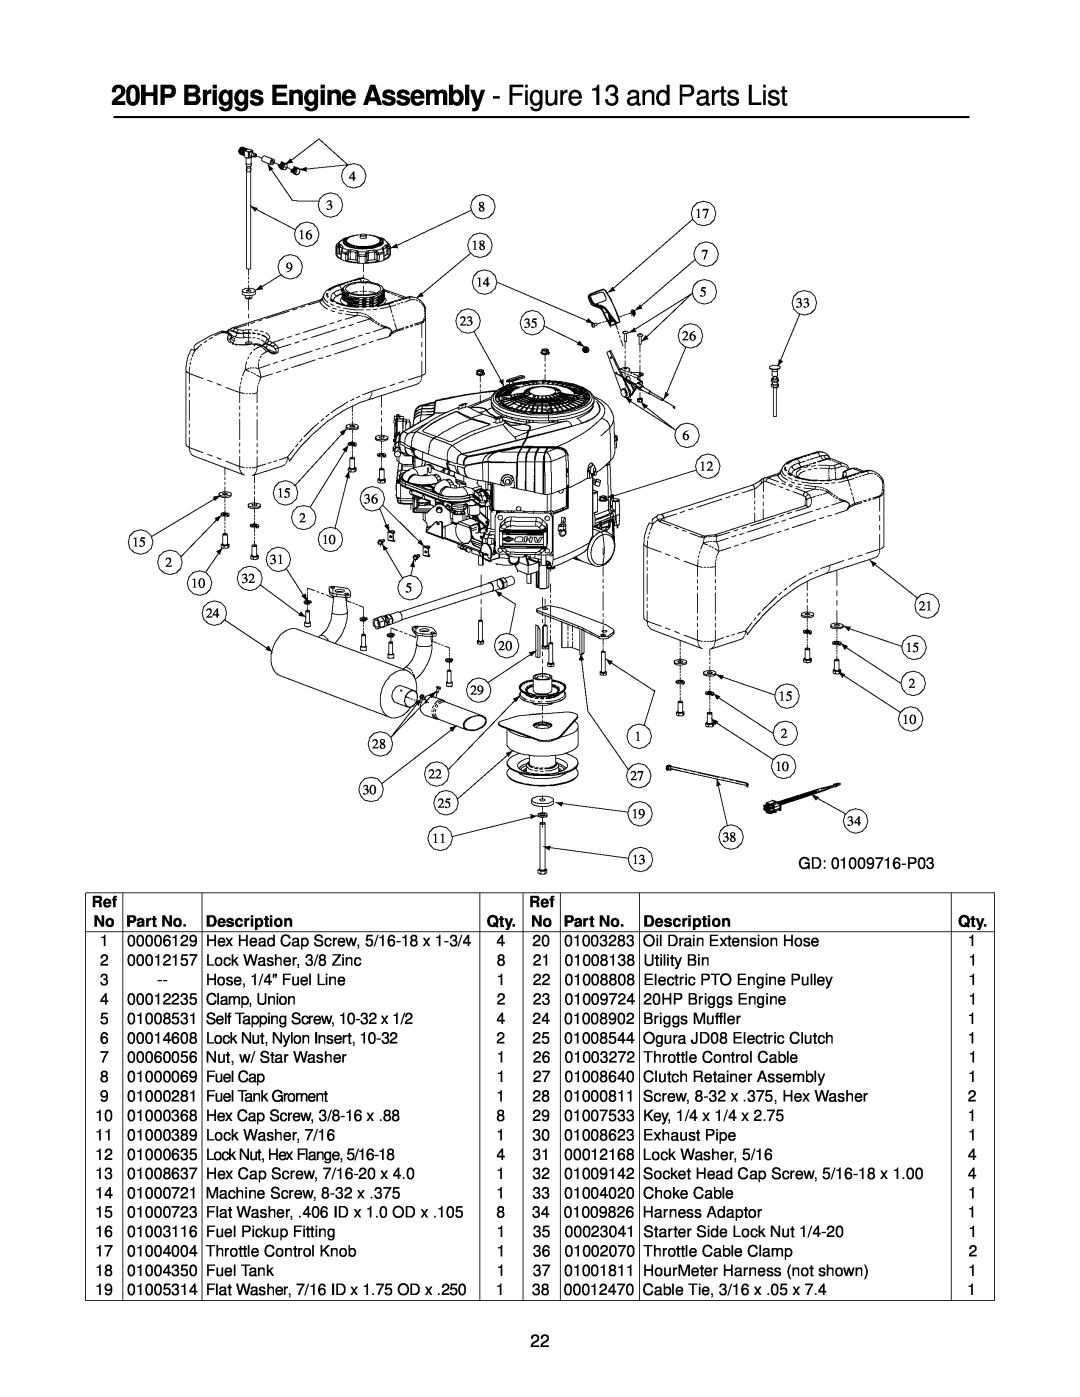 Cub Cadet 20HP Z-Force 44 manual 20HP Briggs Engine Assembly - and Parts List, Description 